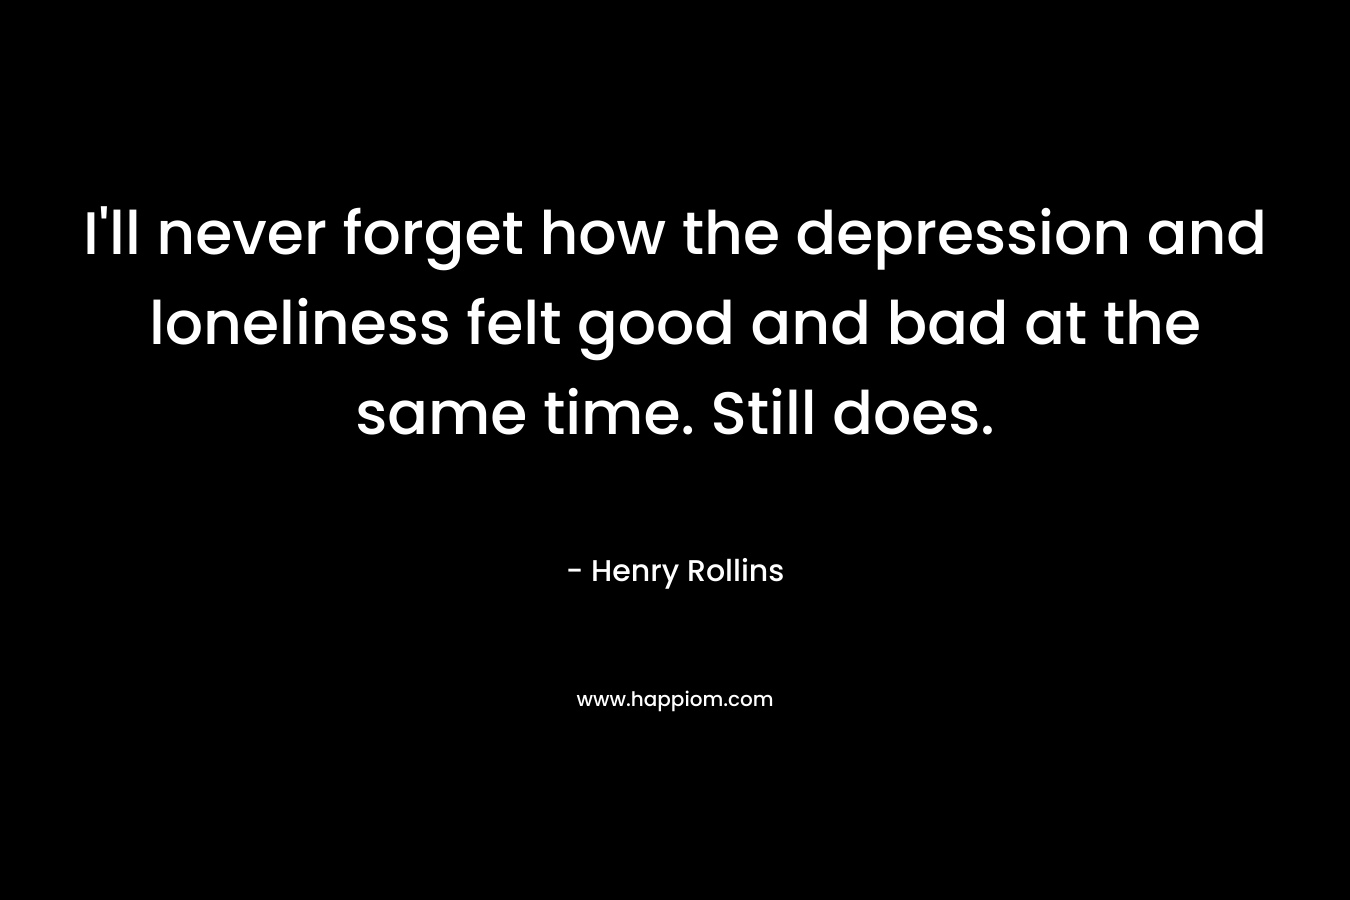 I’ll never forget how the depression and loneliness felt good and bad at the same time. Still does. – Henry Rollins